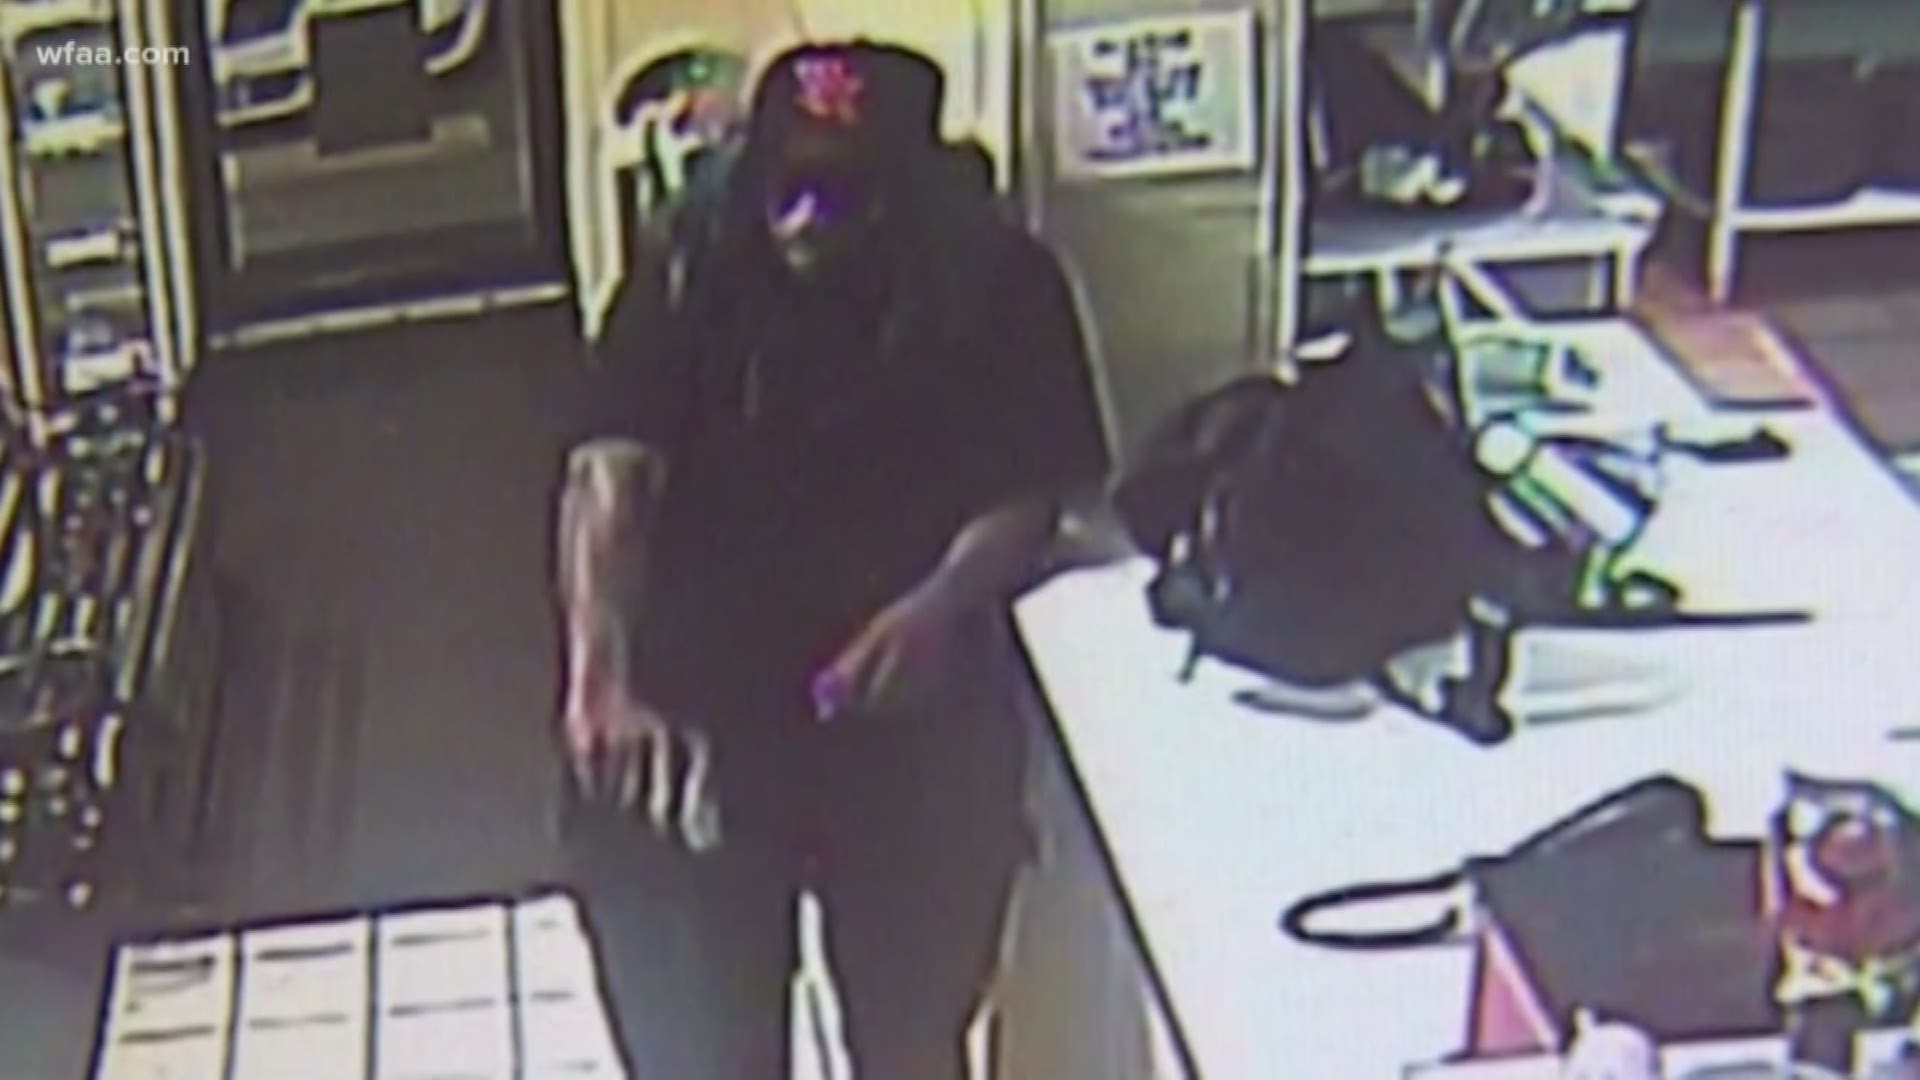 Video captured images of an armed man wearing a wig with a hat attached as he robbed a pizza restaurant. Now there's a concern he's linked to other crimes.